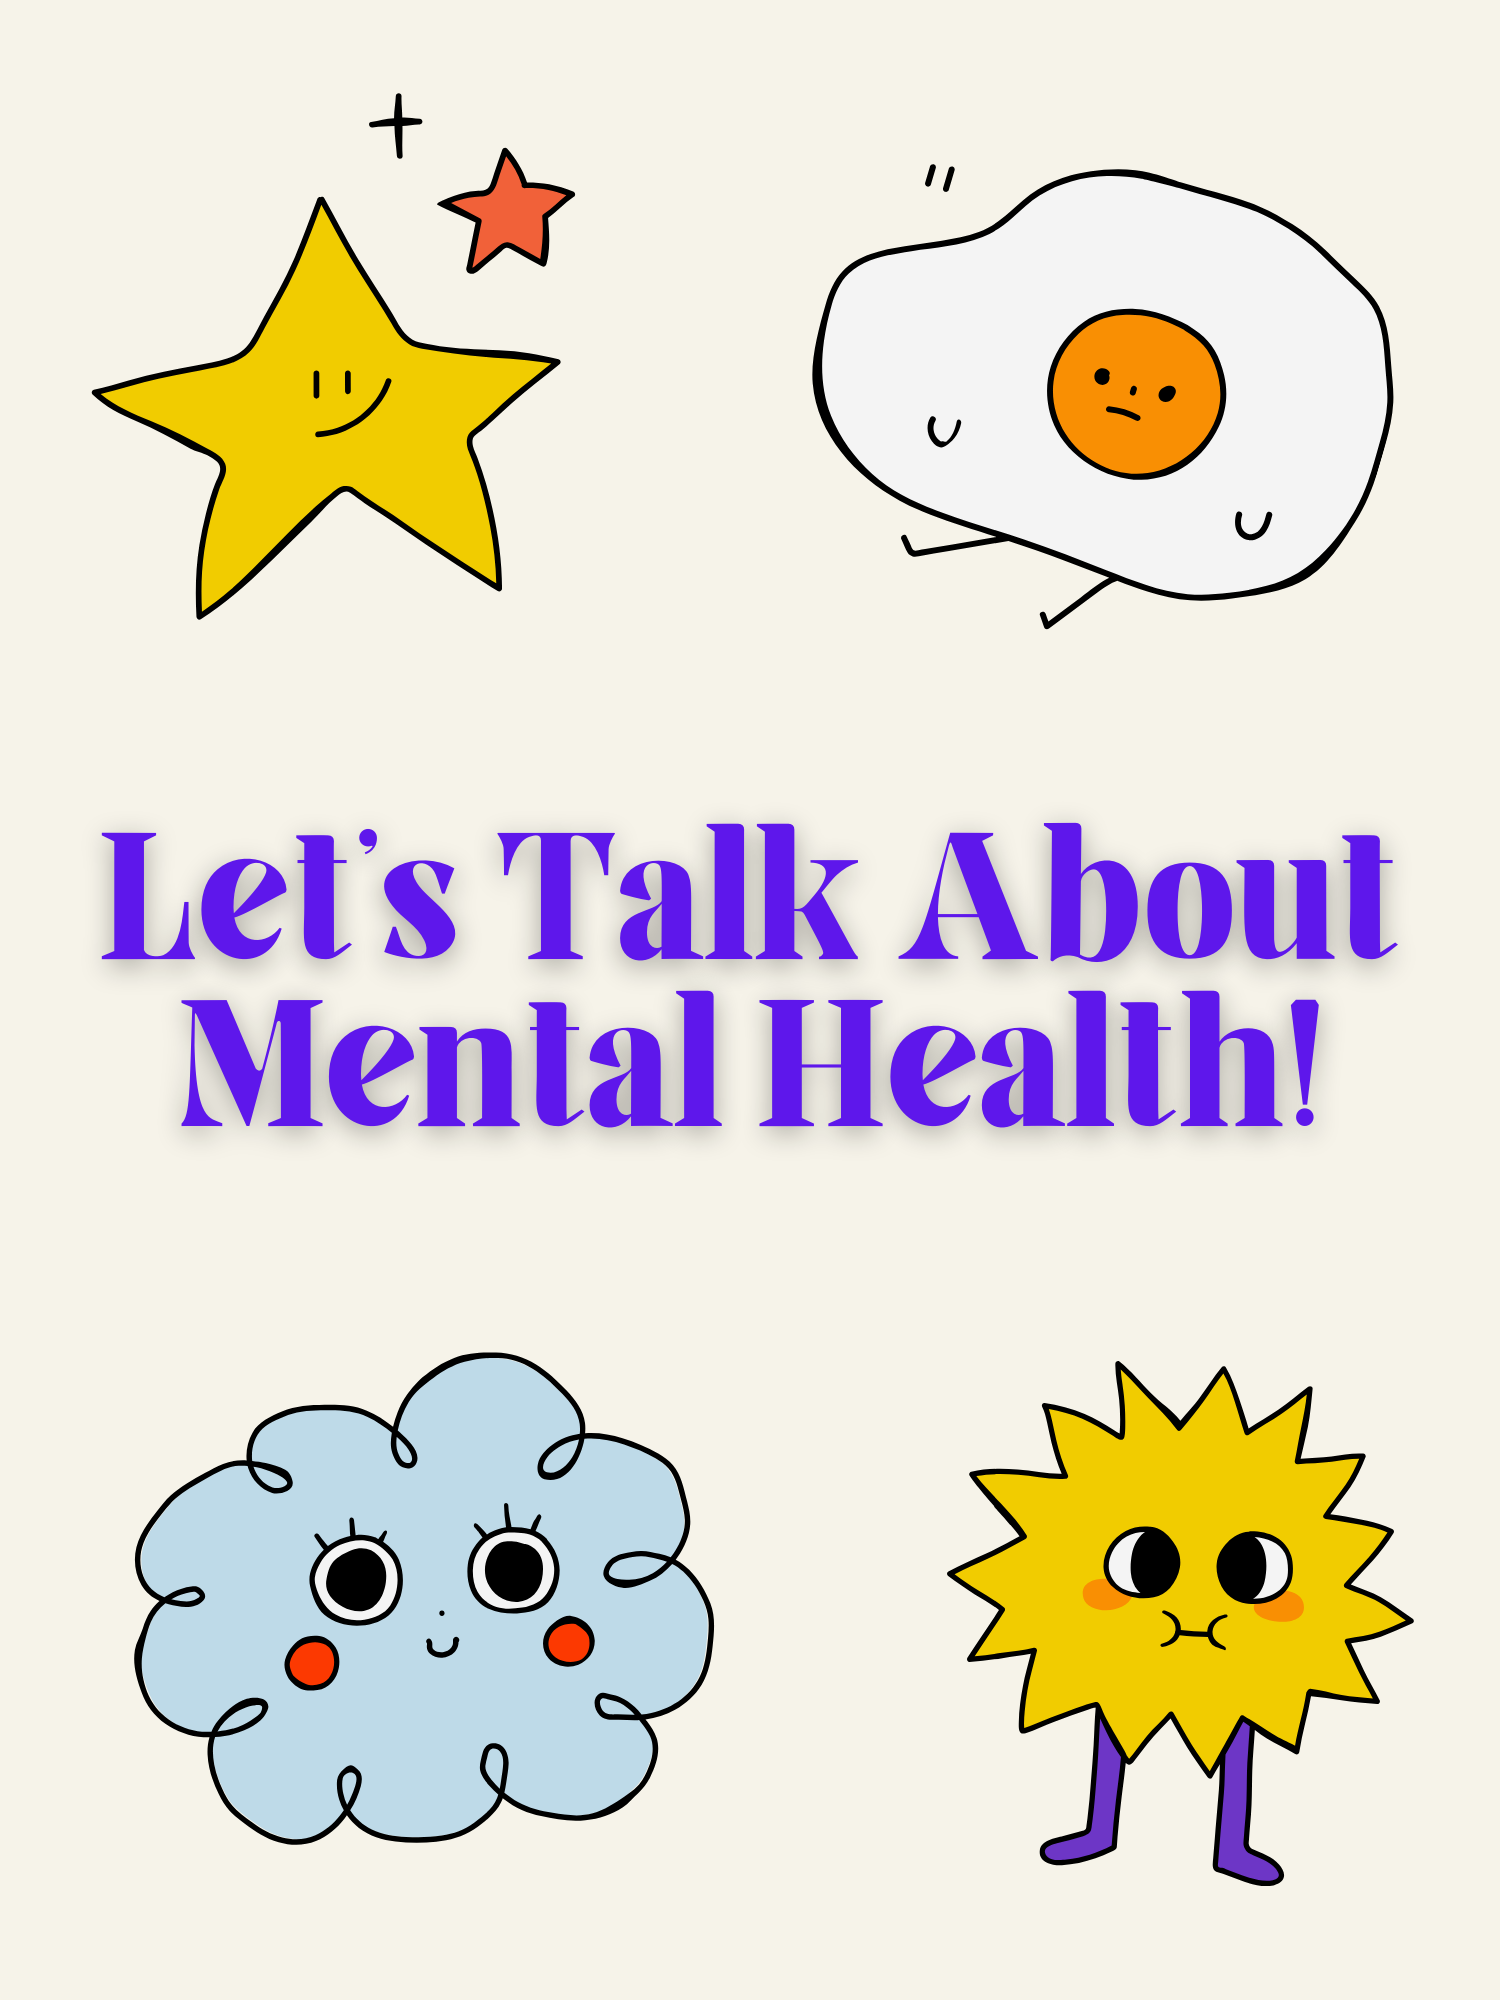 let's talk about mental health